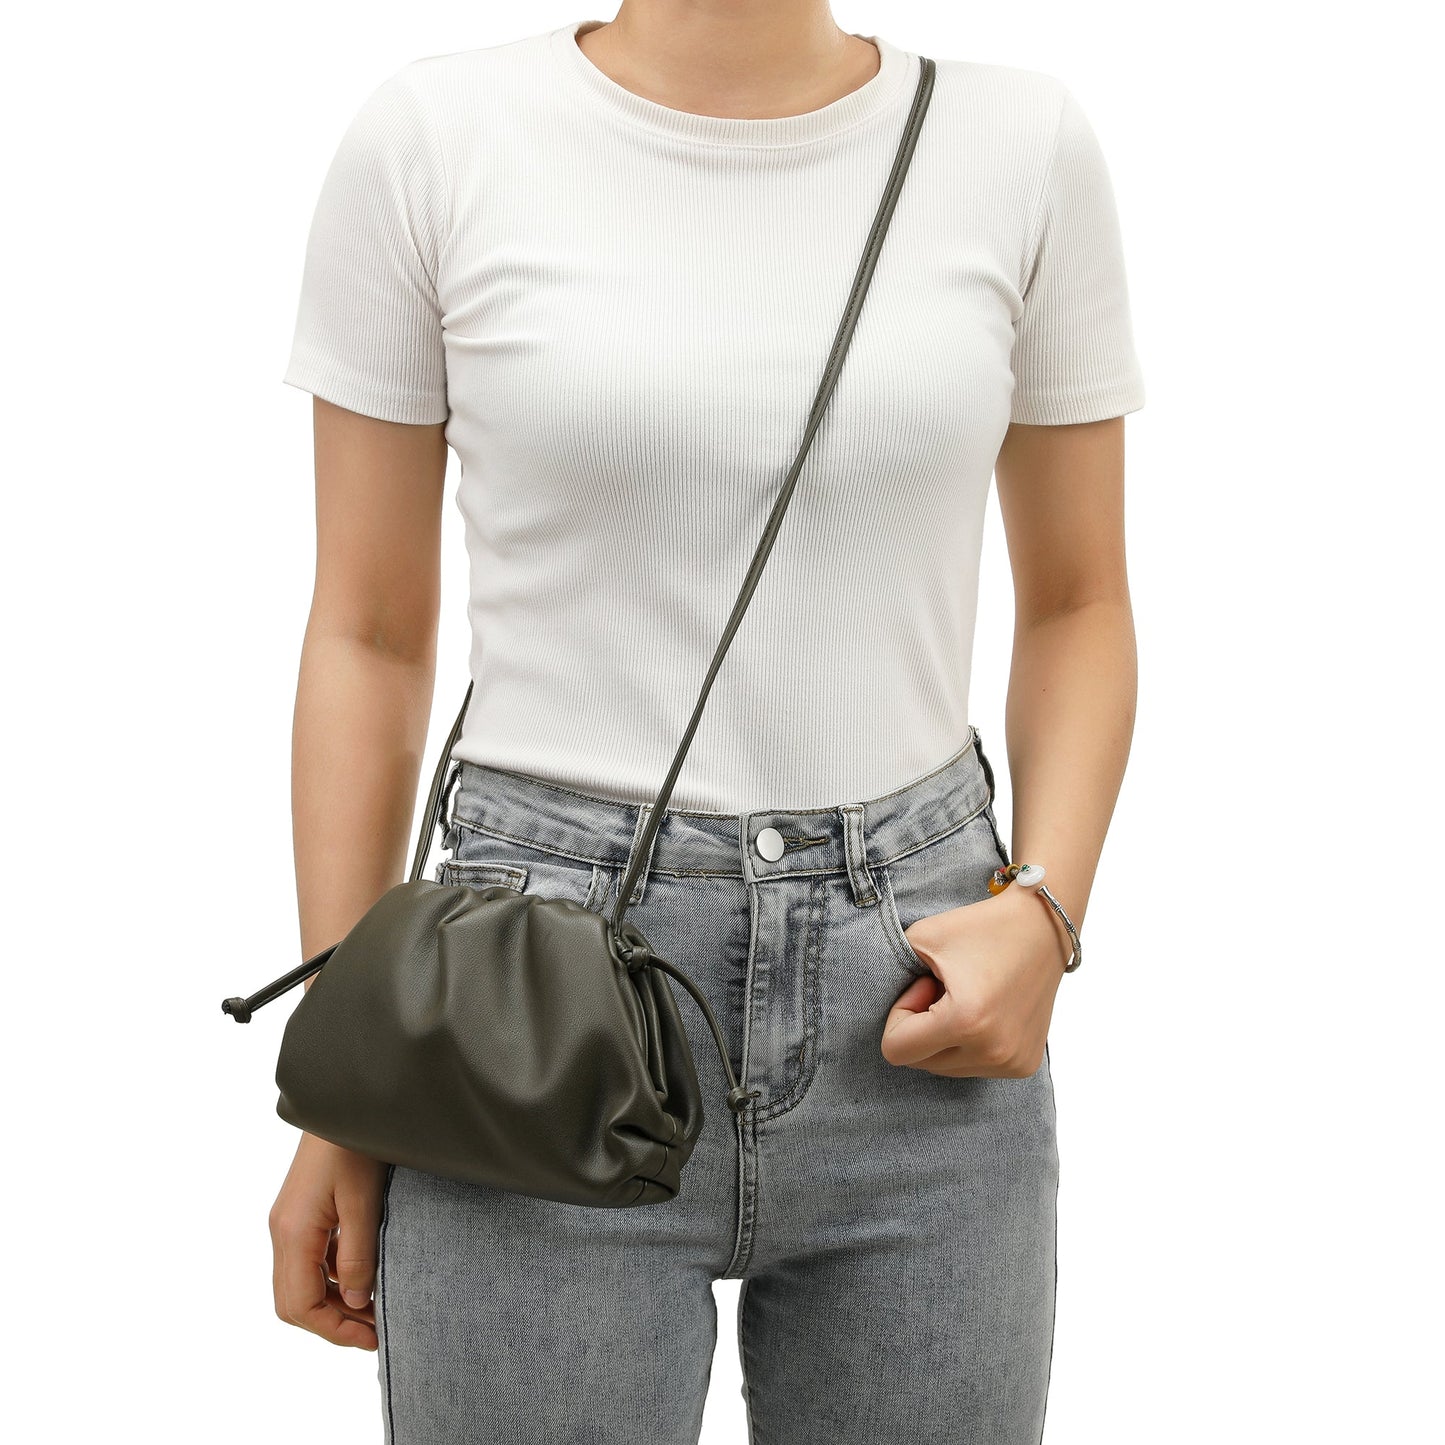 Smooth Leather Pouch/Shoulder Bag